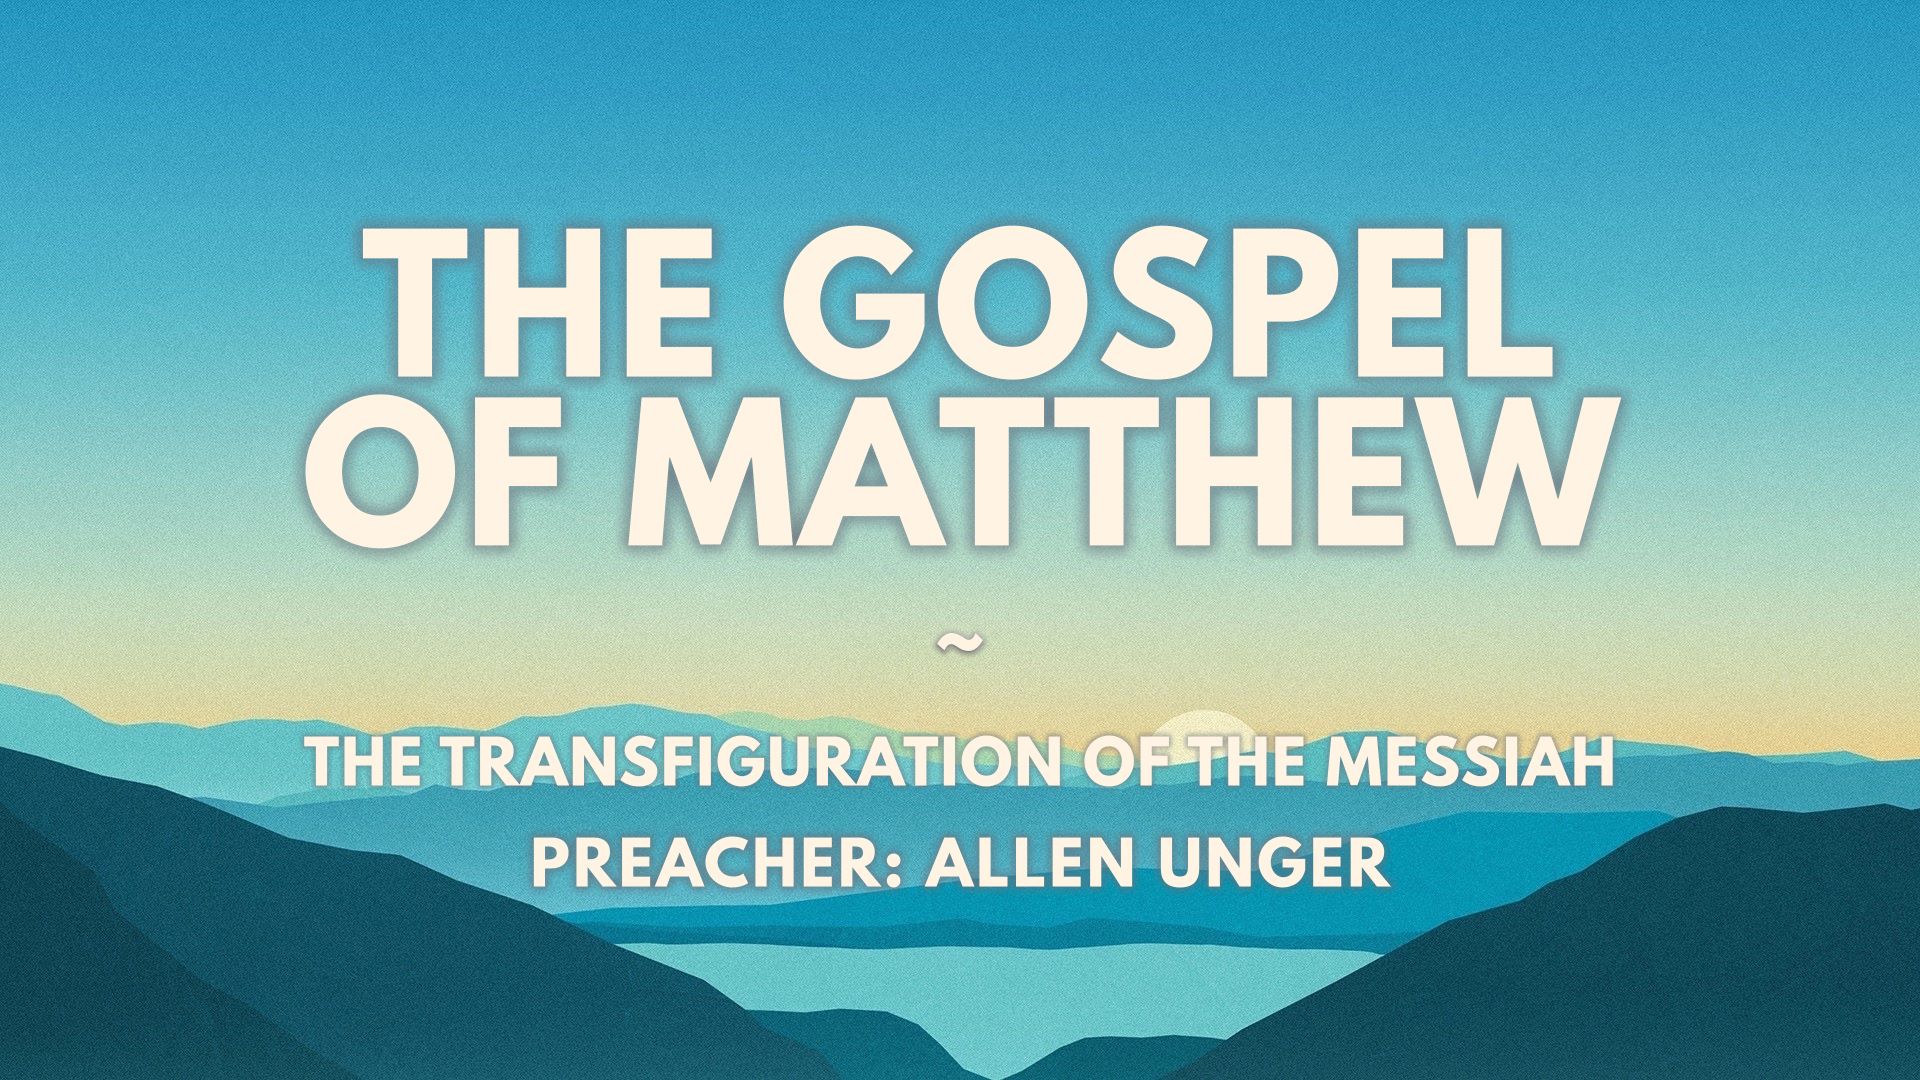 The Transfiguration of the Messiah